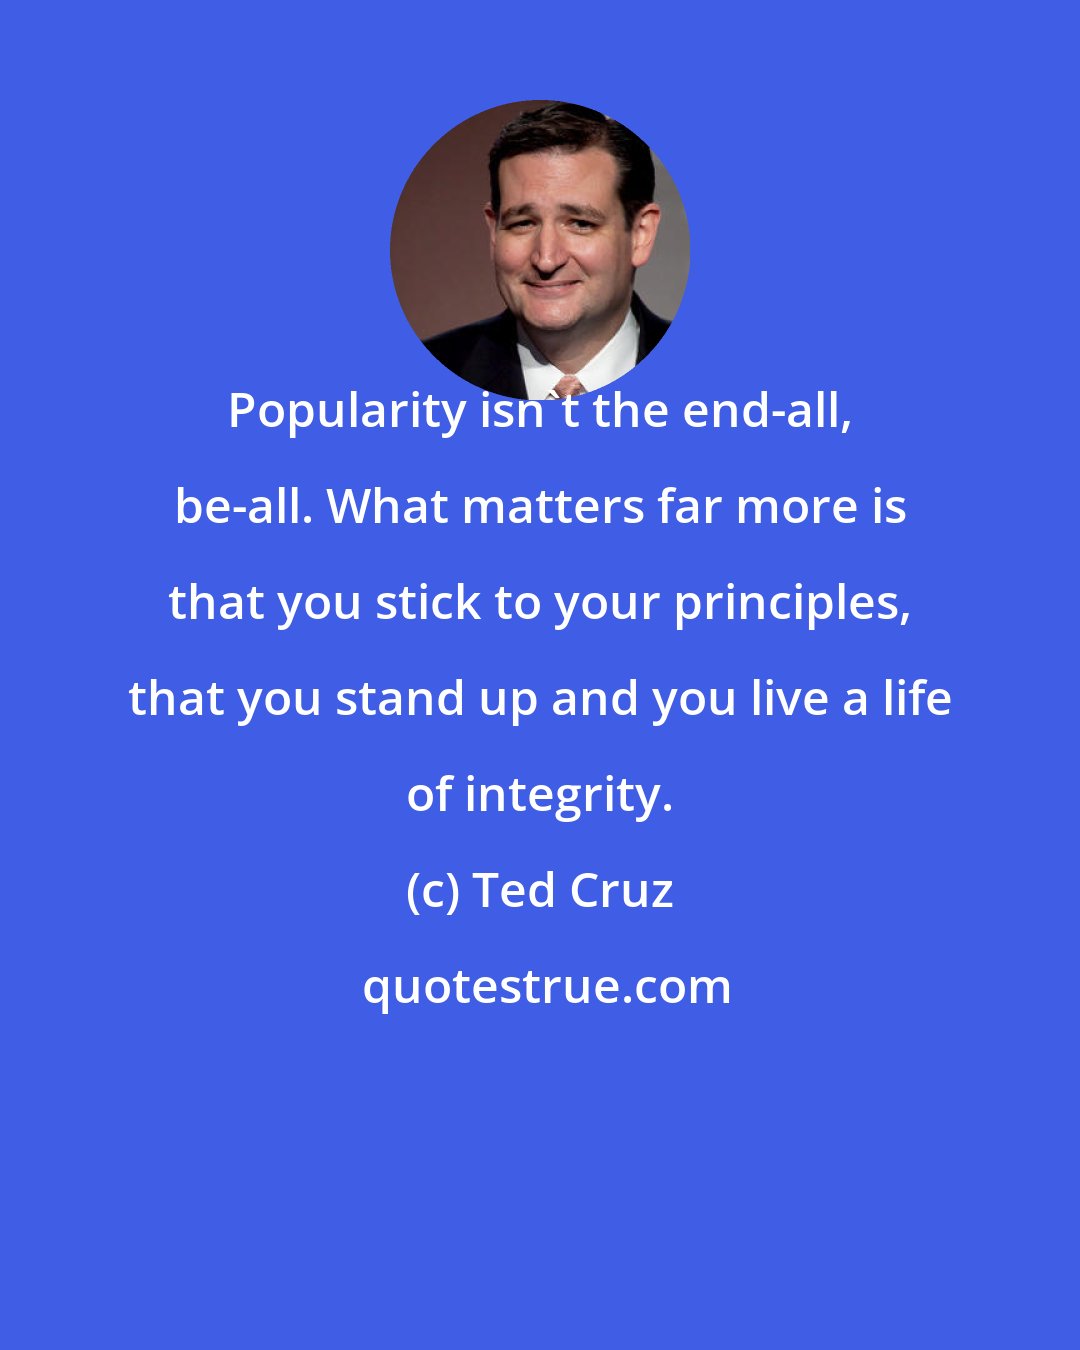 Ted Cruz: Popularity isn't the end-all, be-all. What matters far more is that you stick to your principles, that you stand up and you live a life of integrity.